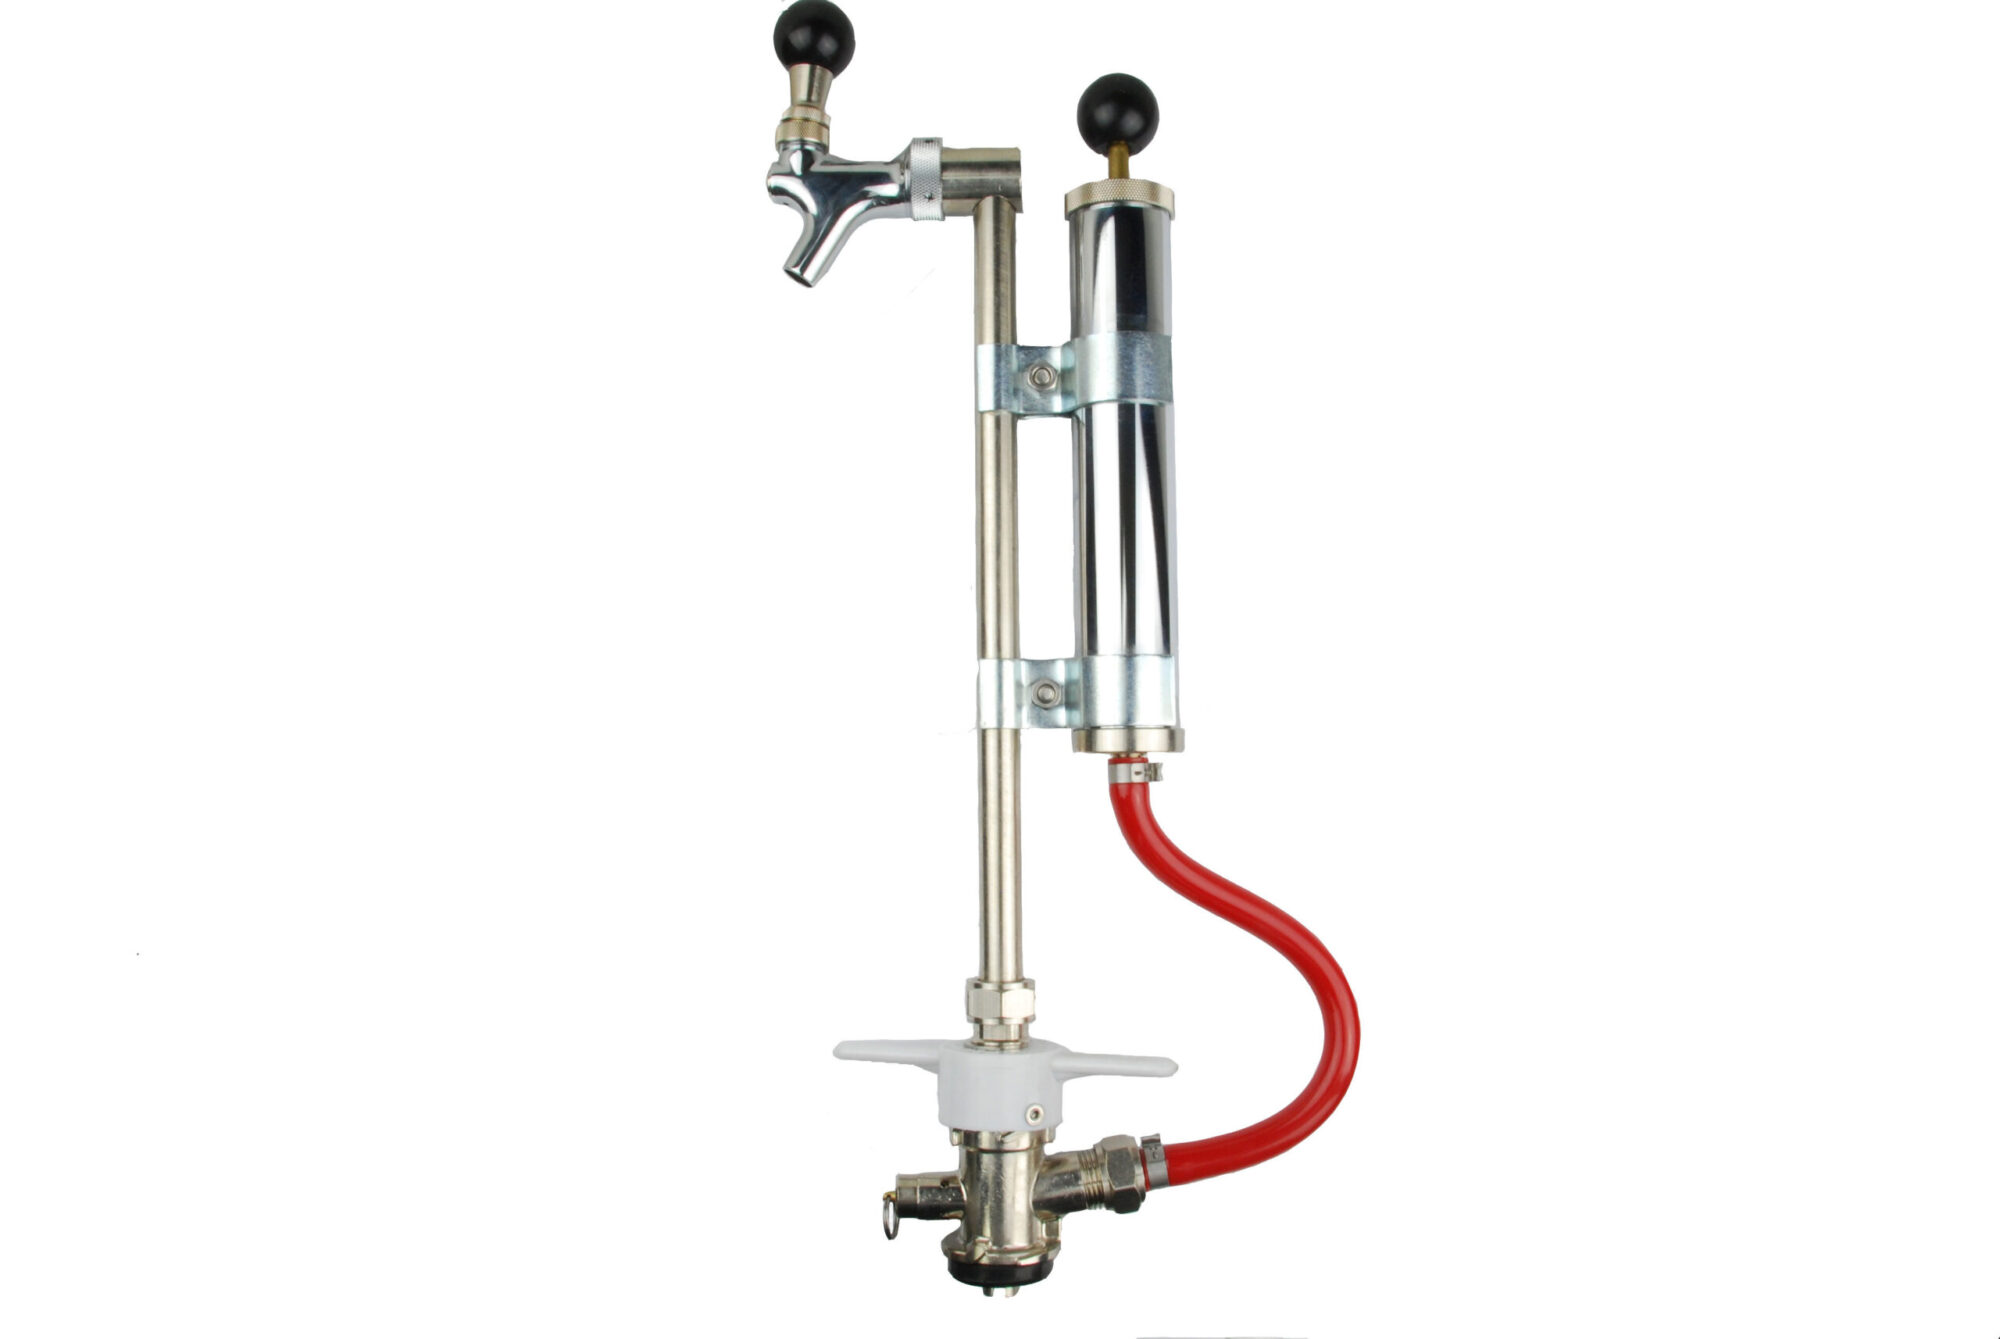 752SE Deluxe Picnic Pump with 8" Pump, Metal Rod, Chrome Faucet and Plastic Wing Handle - "S" System